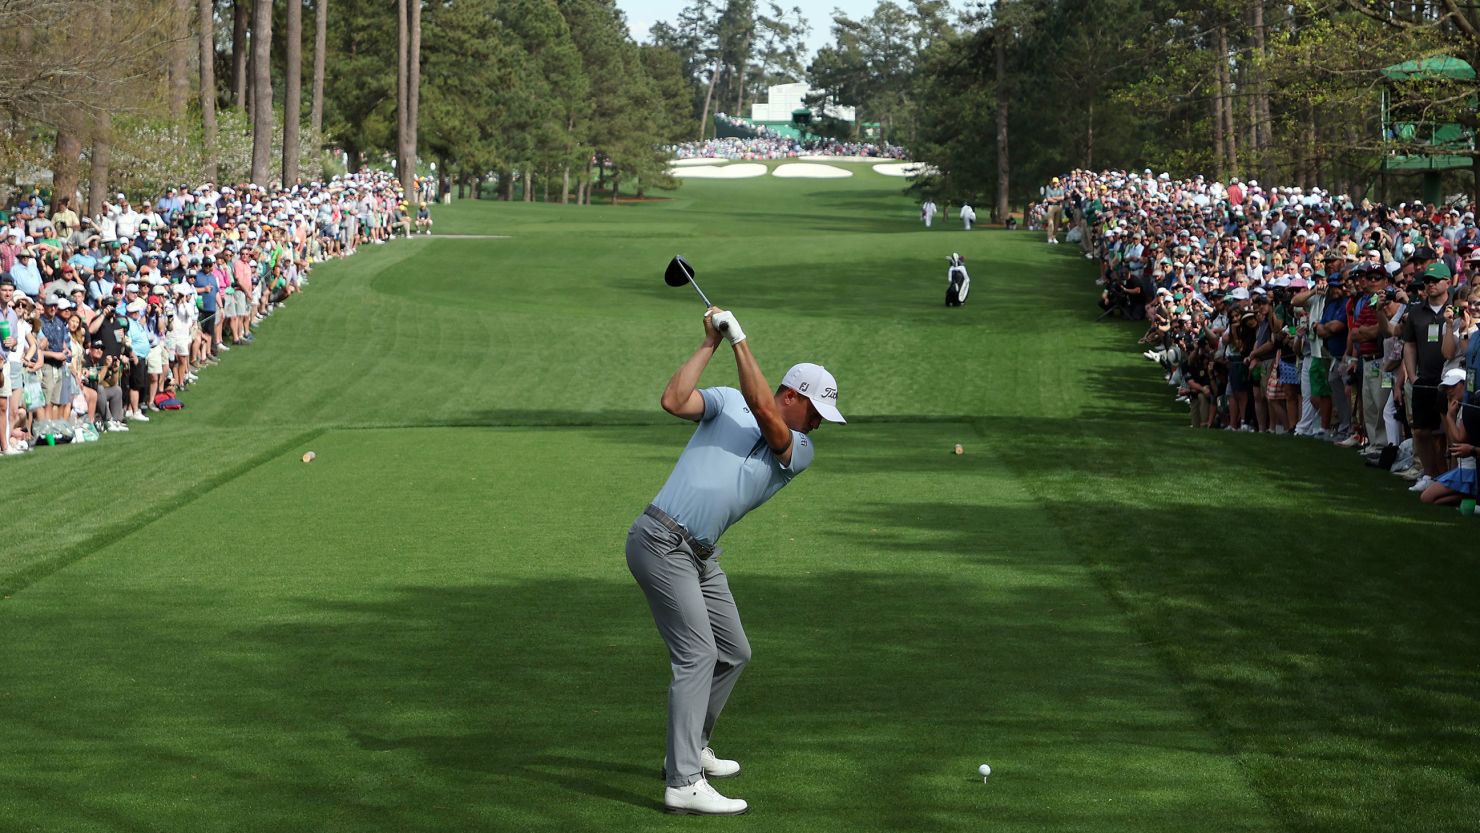 Justin Thomas drives from the tee during a practice round prior to the Masters at Augusta National Golf Club in April 2022.